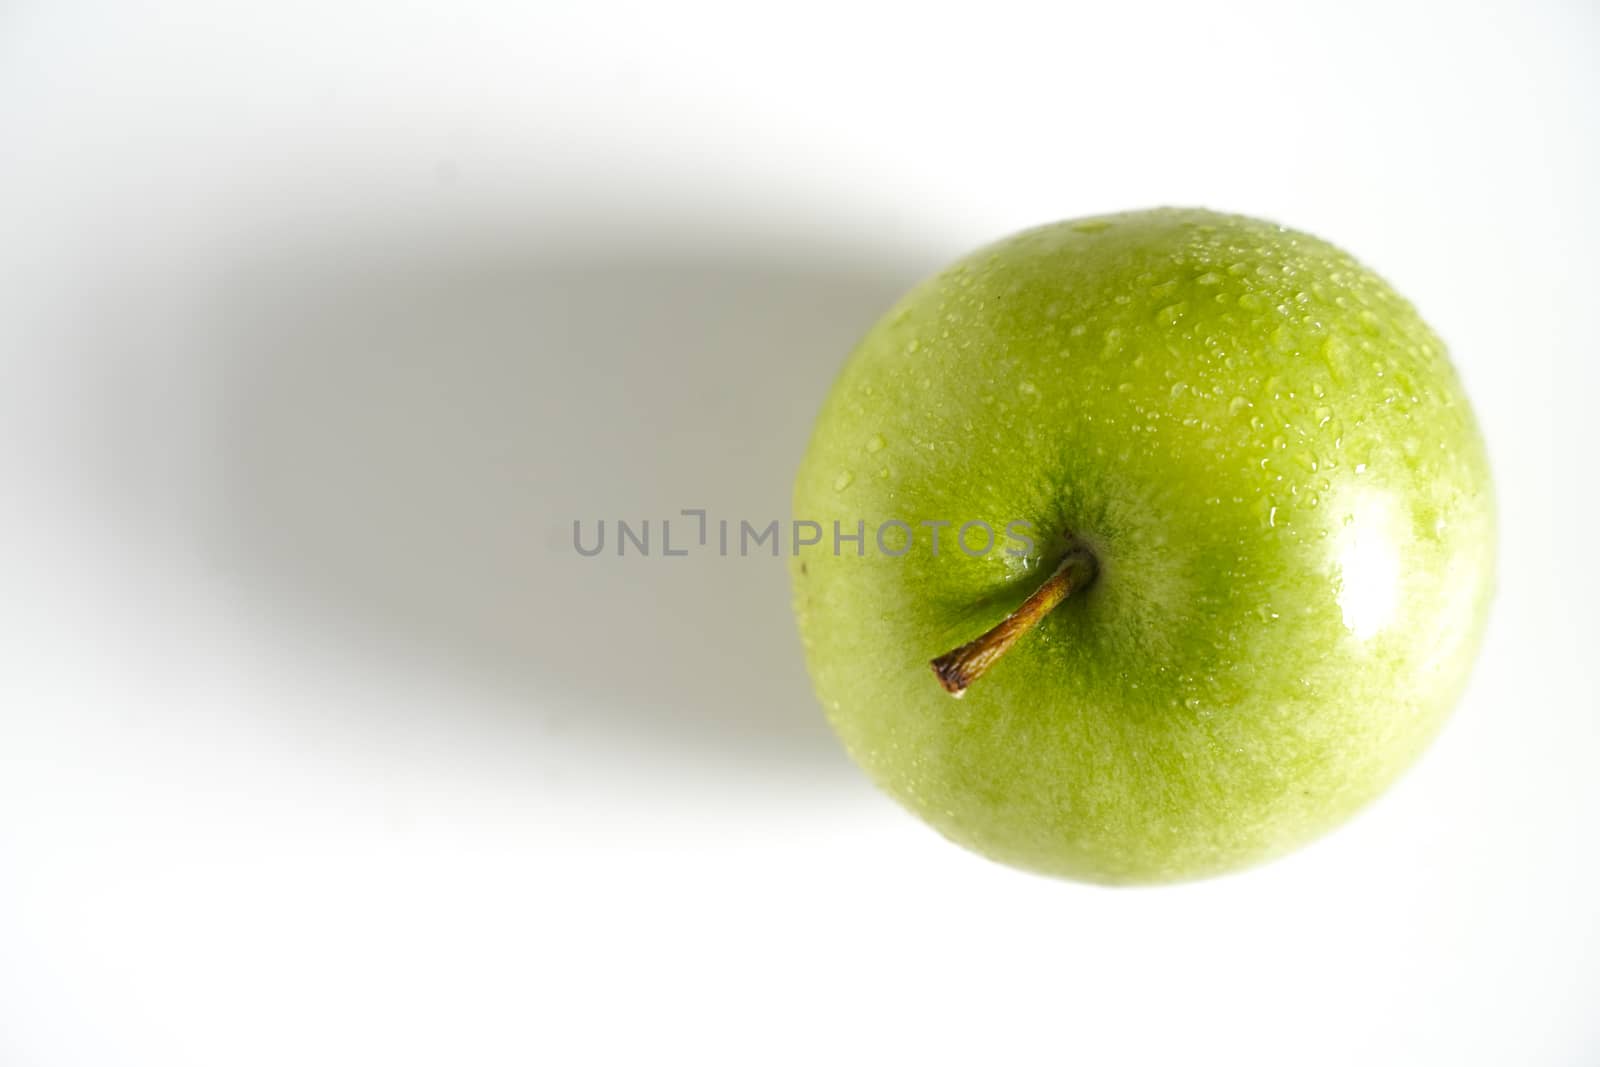 A whole granny smith green apple against a plain whit background